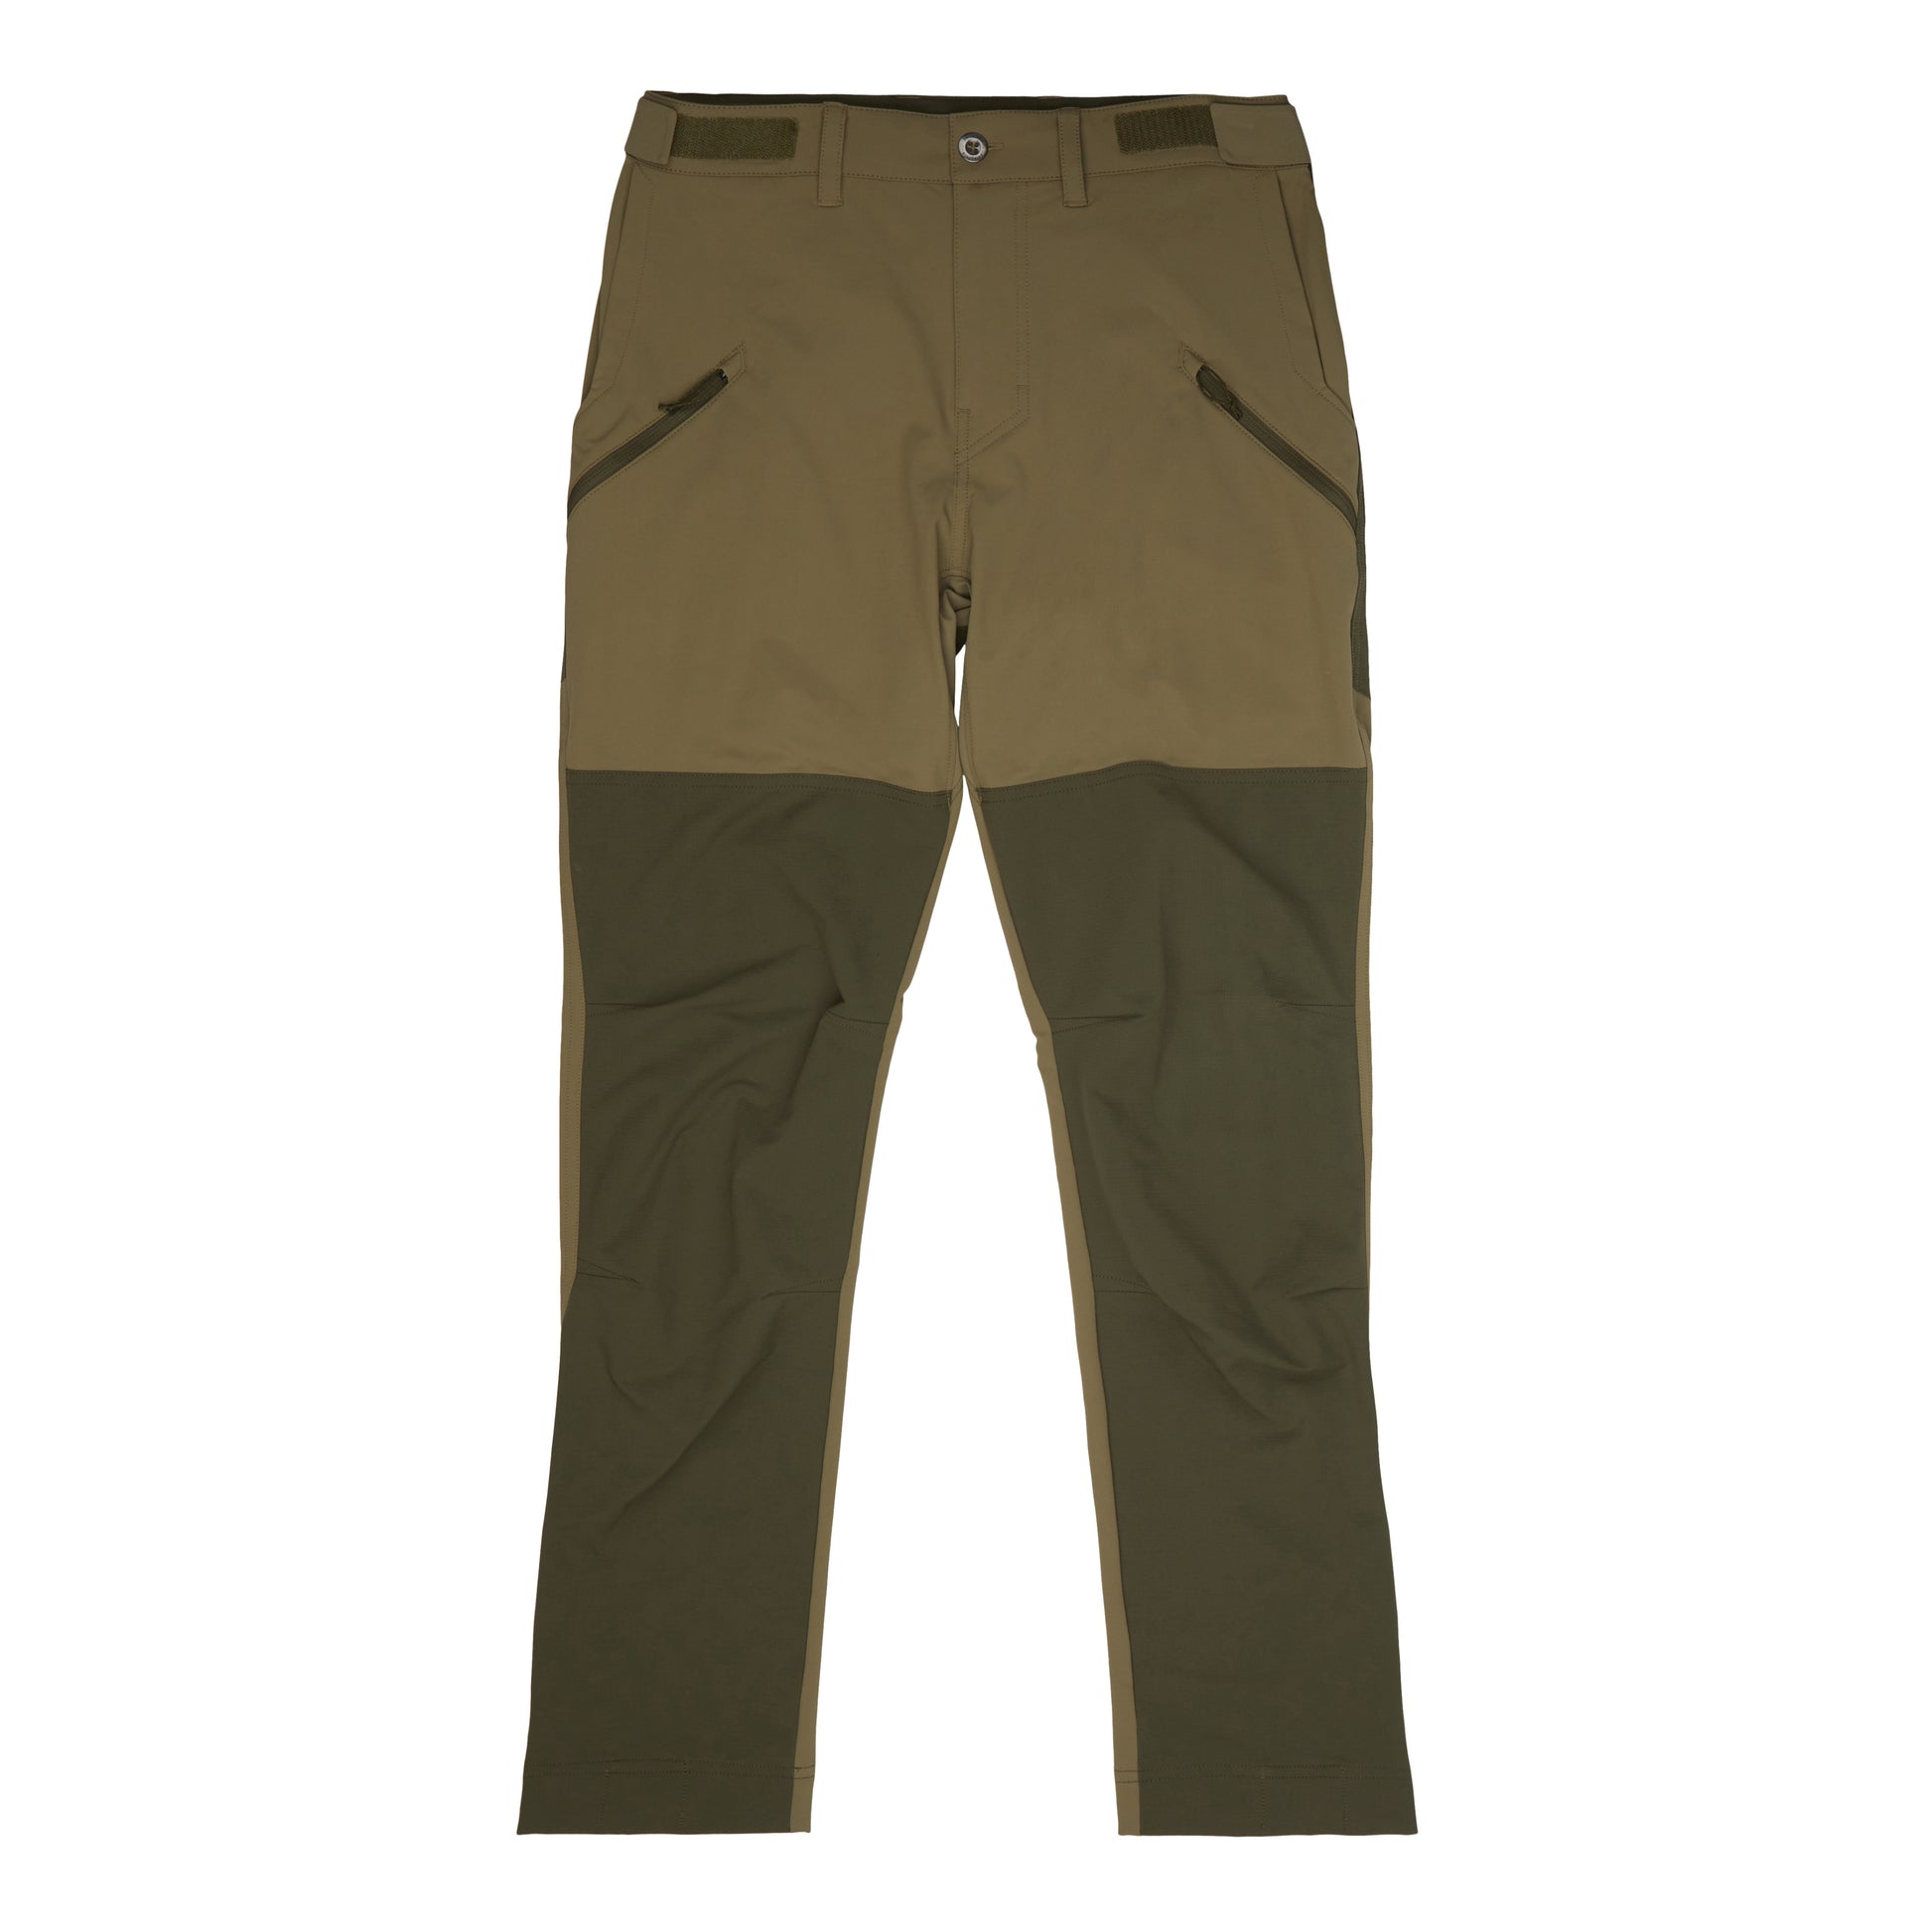 Patagonia Size XL Pants for Men for sale